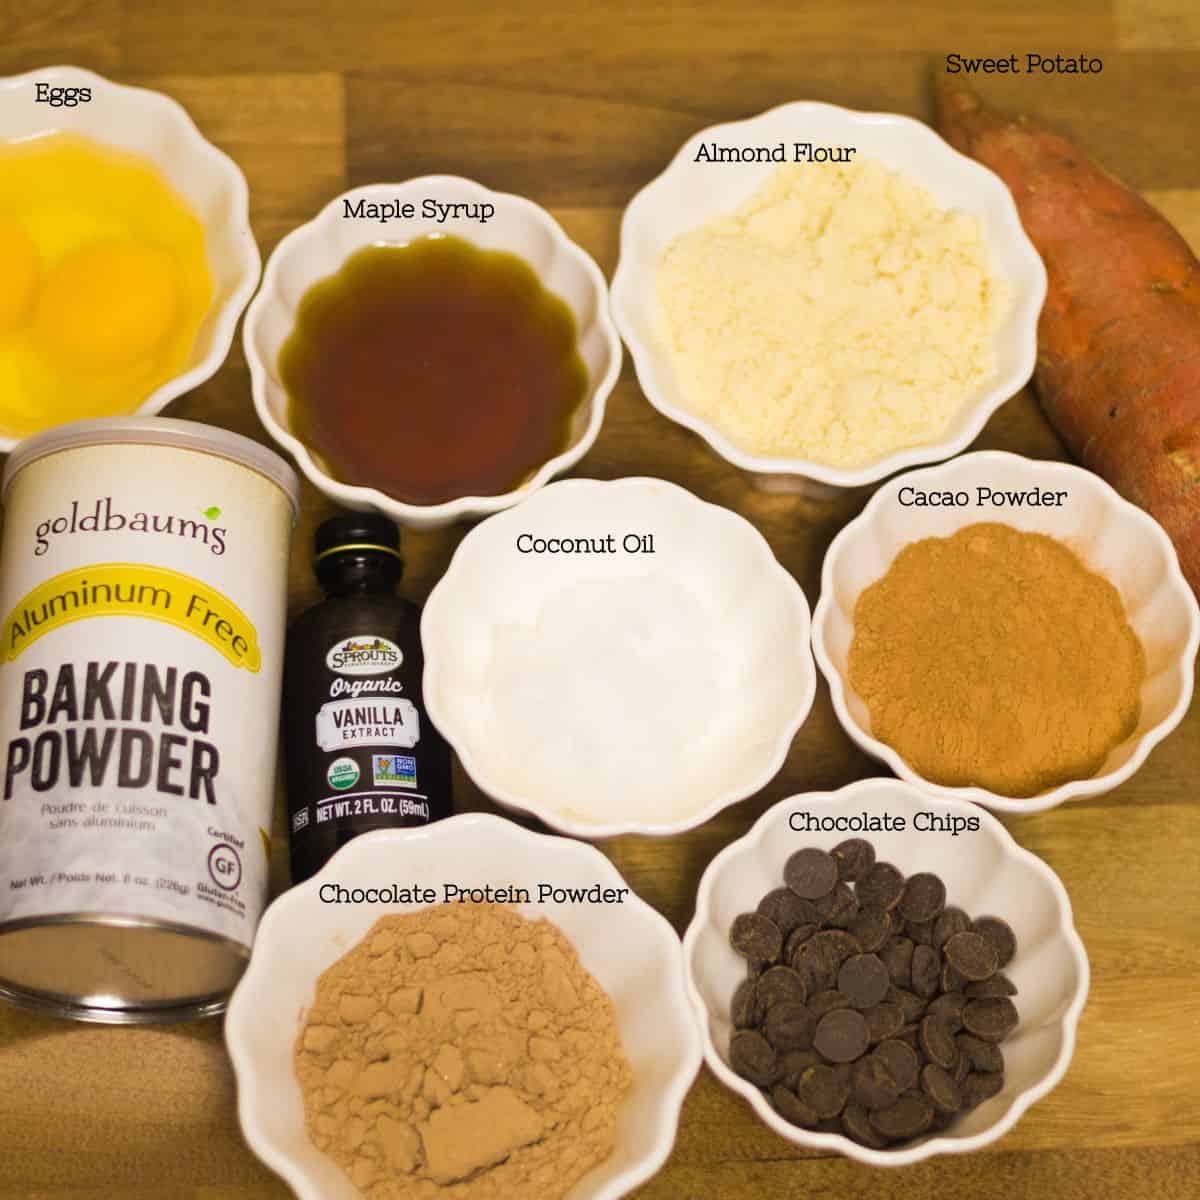 Individual bowls of ingredients laid out for sweet potato protein brownies, including eggs, maple syrup, almond flour, sweet potato, cacao powder, coconut oil, chocolate protein powder, and chocolate chips, ready for mixing.